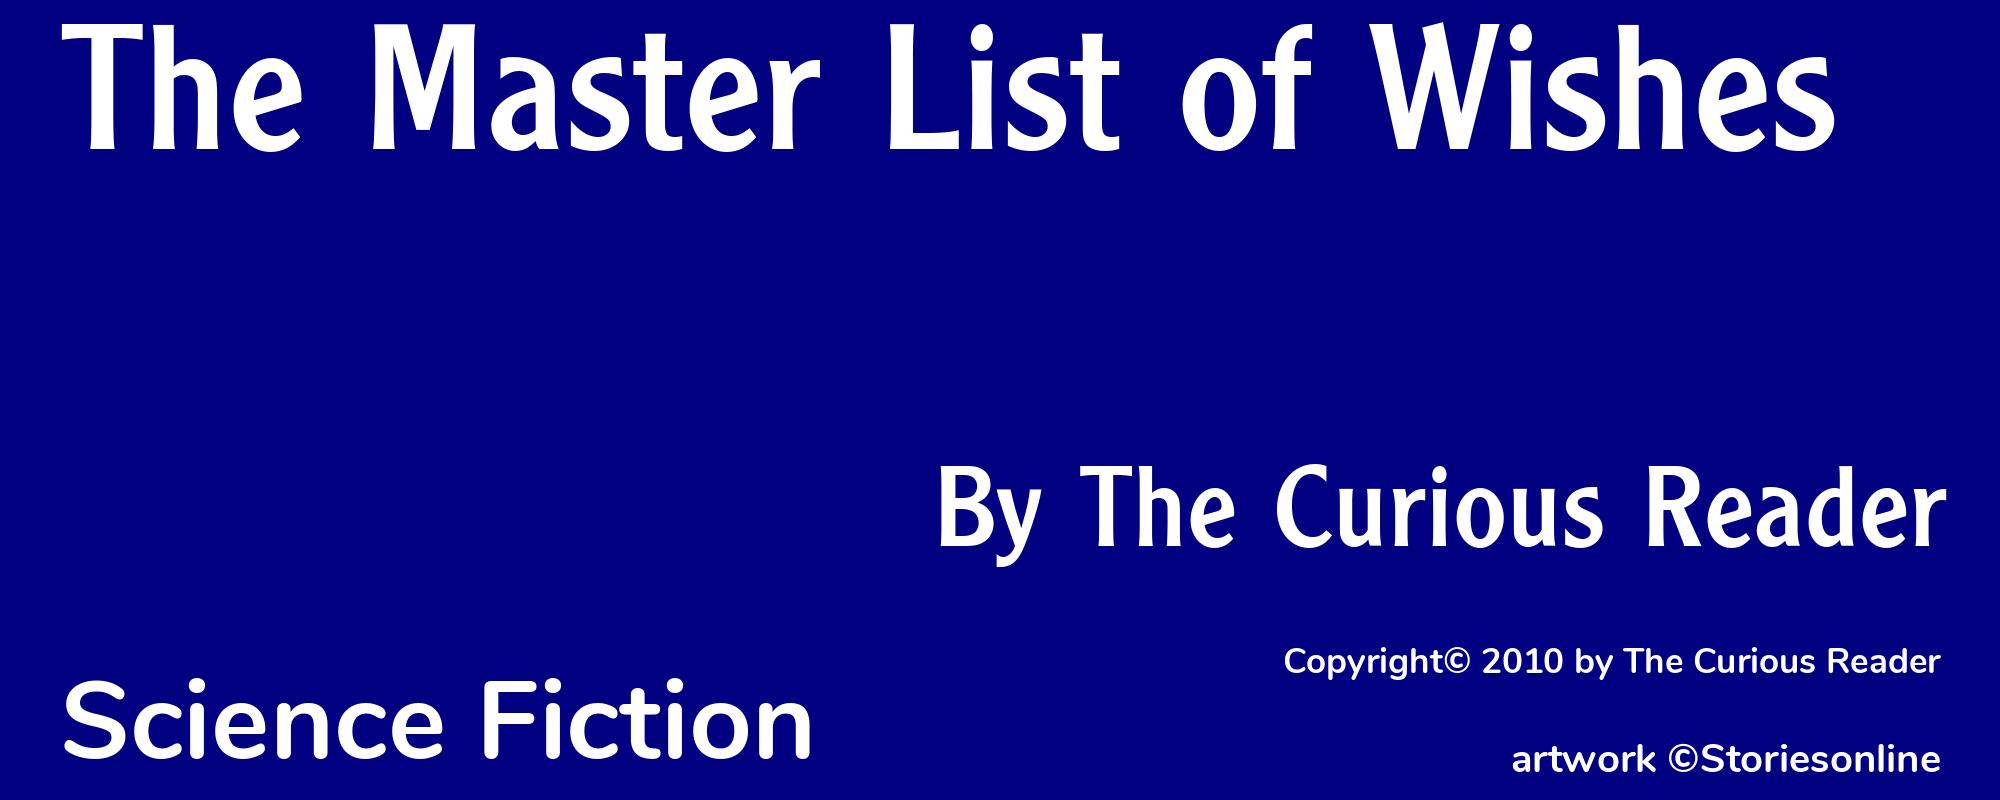 The Master List of Wishes - Cover